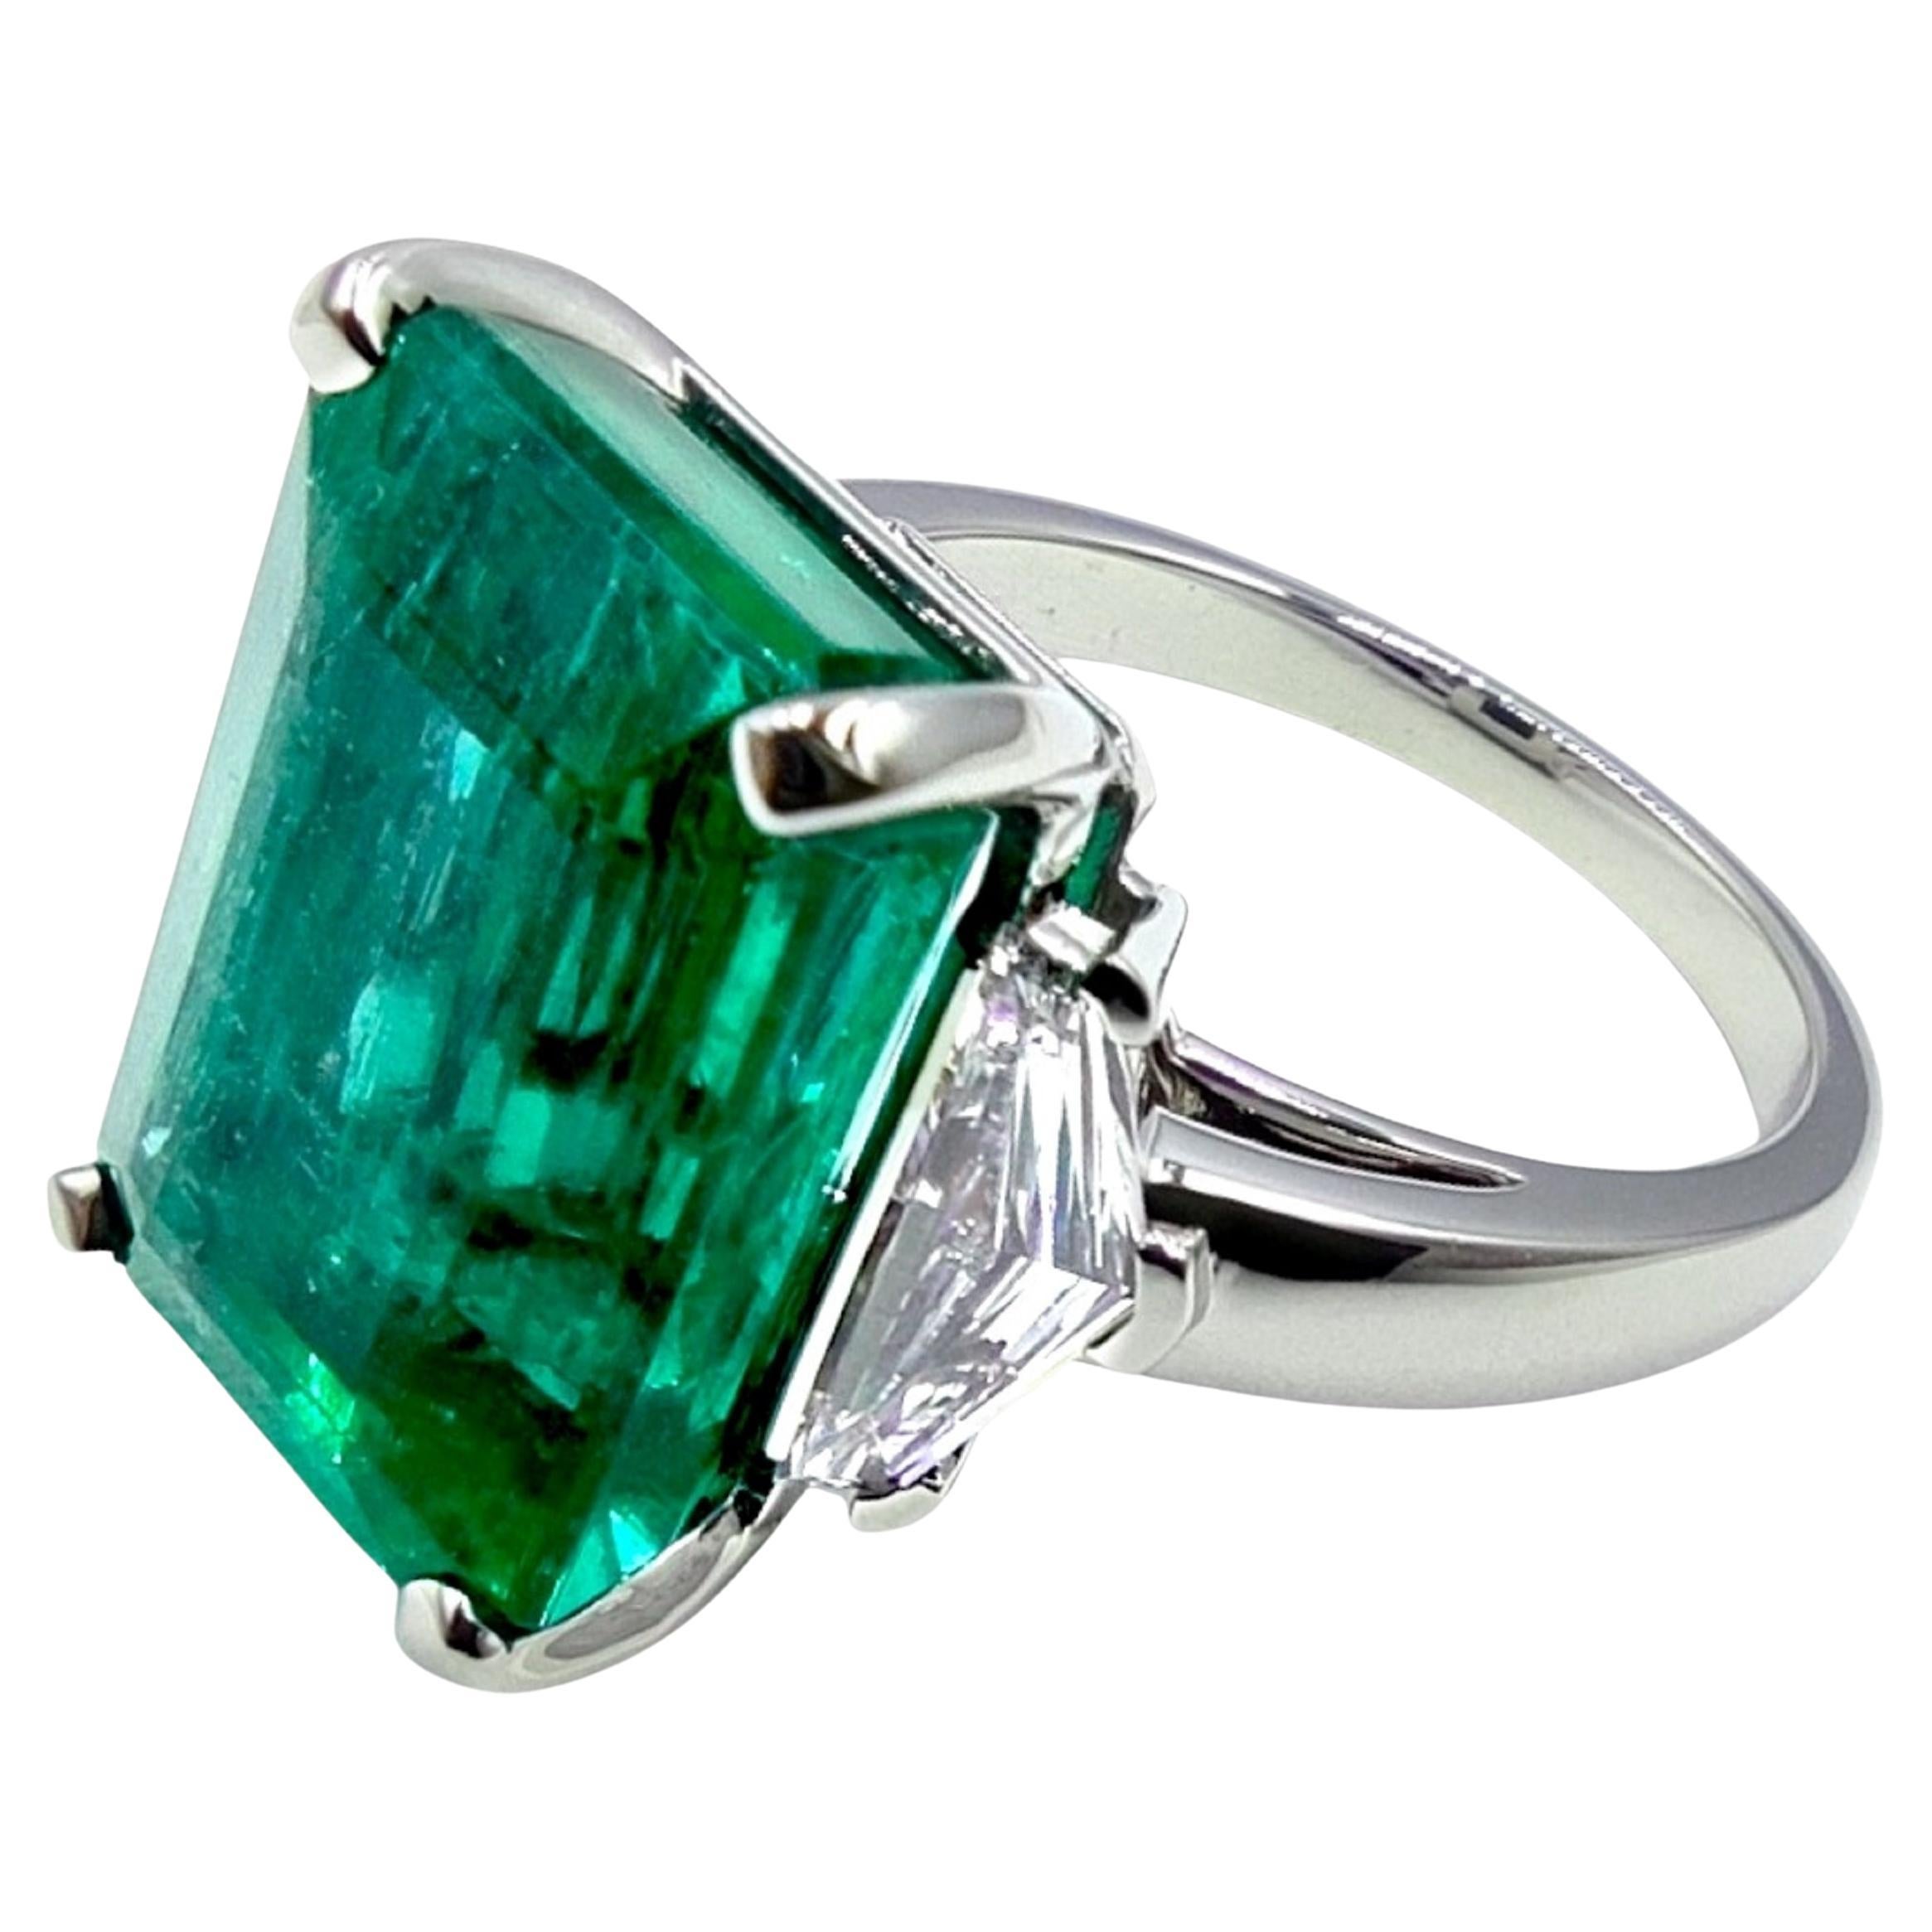 This Antinori di Sanpietro ROMA Handmade in Italy three-stone ring's center stone 9.41 carat Emerald has been awarded a Gubelin Gemmological Profile Certification for it's exceptional beauty and characteristics. 

The Gubelin Certification Report